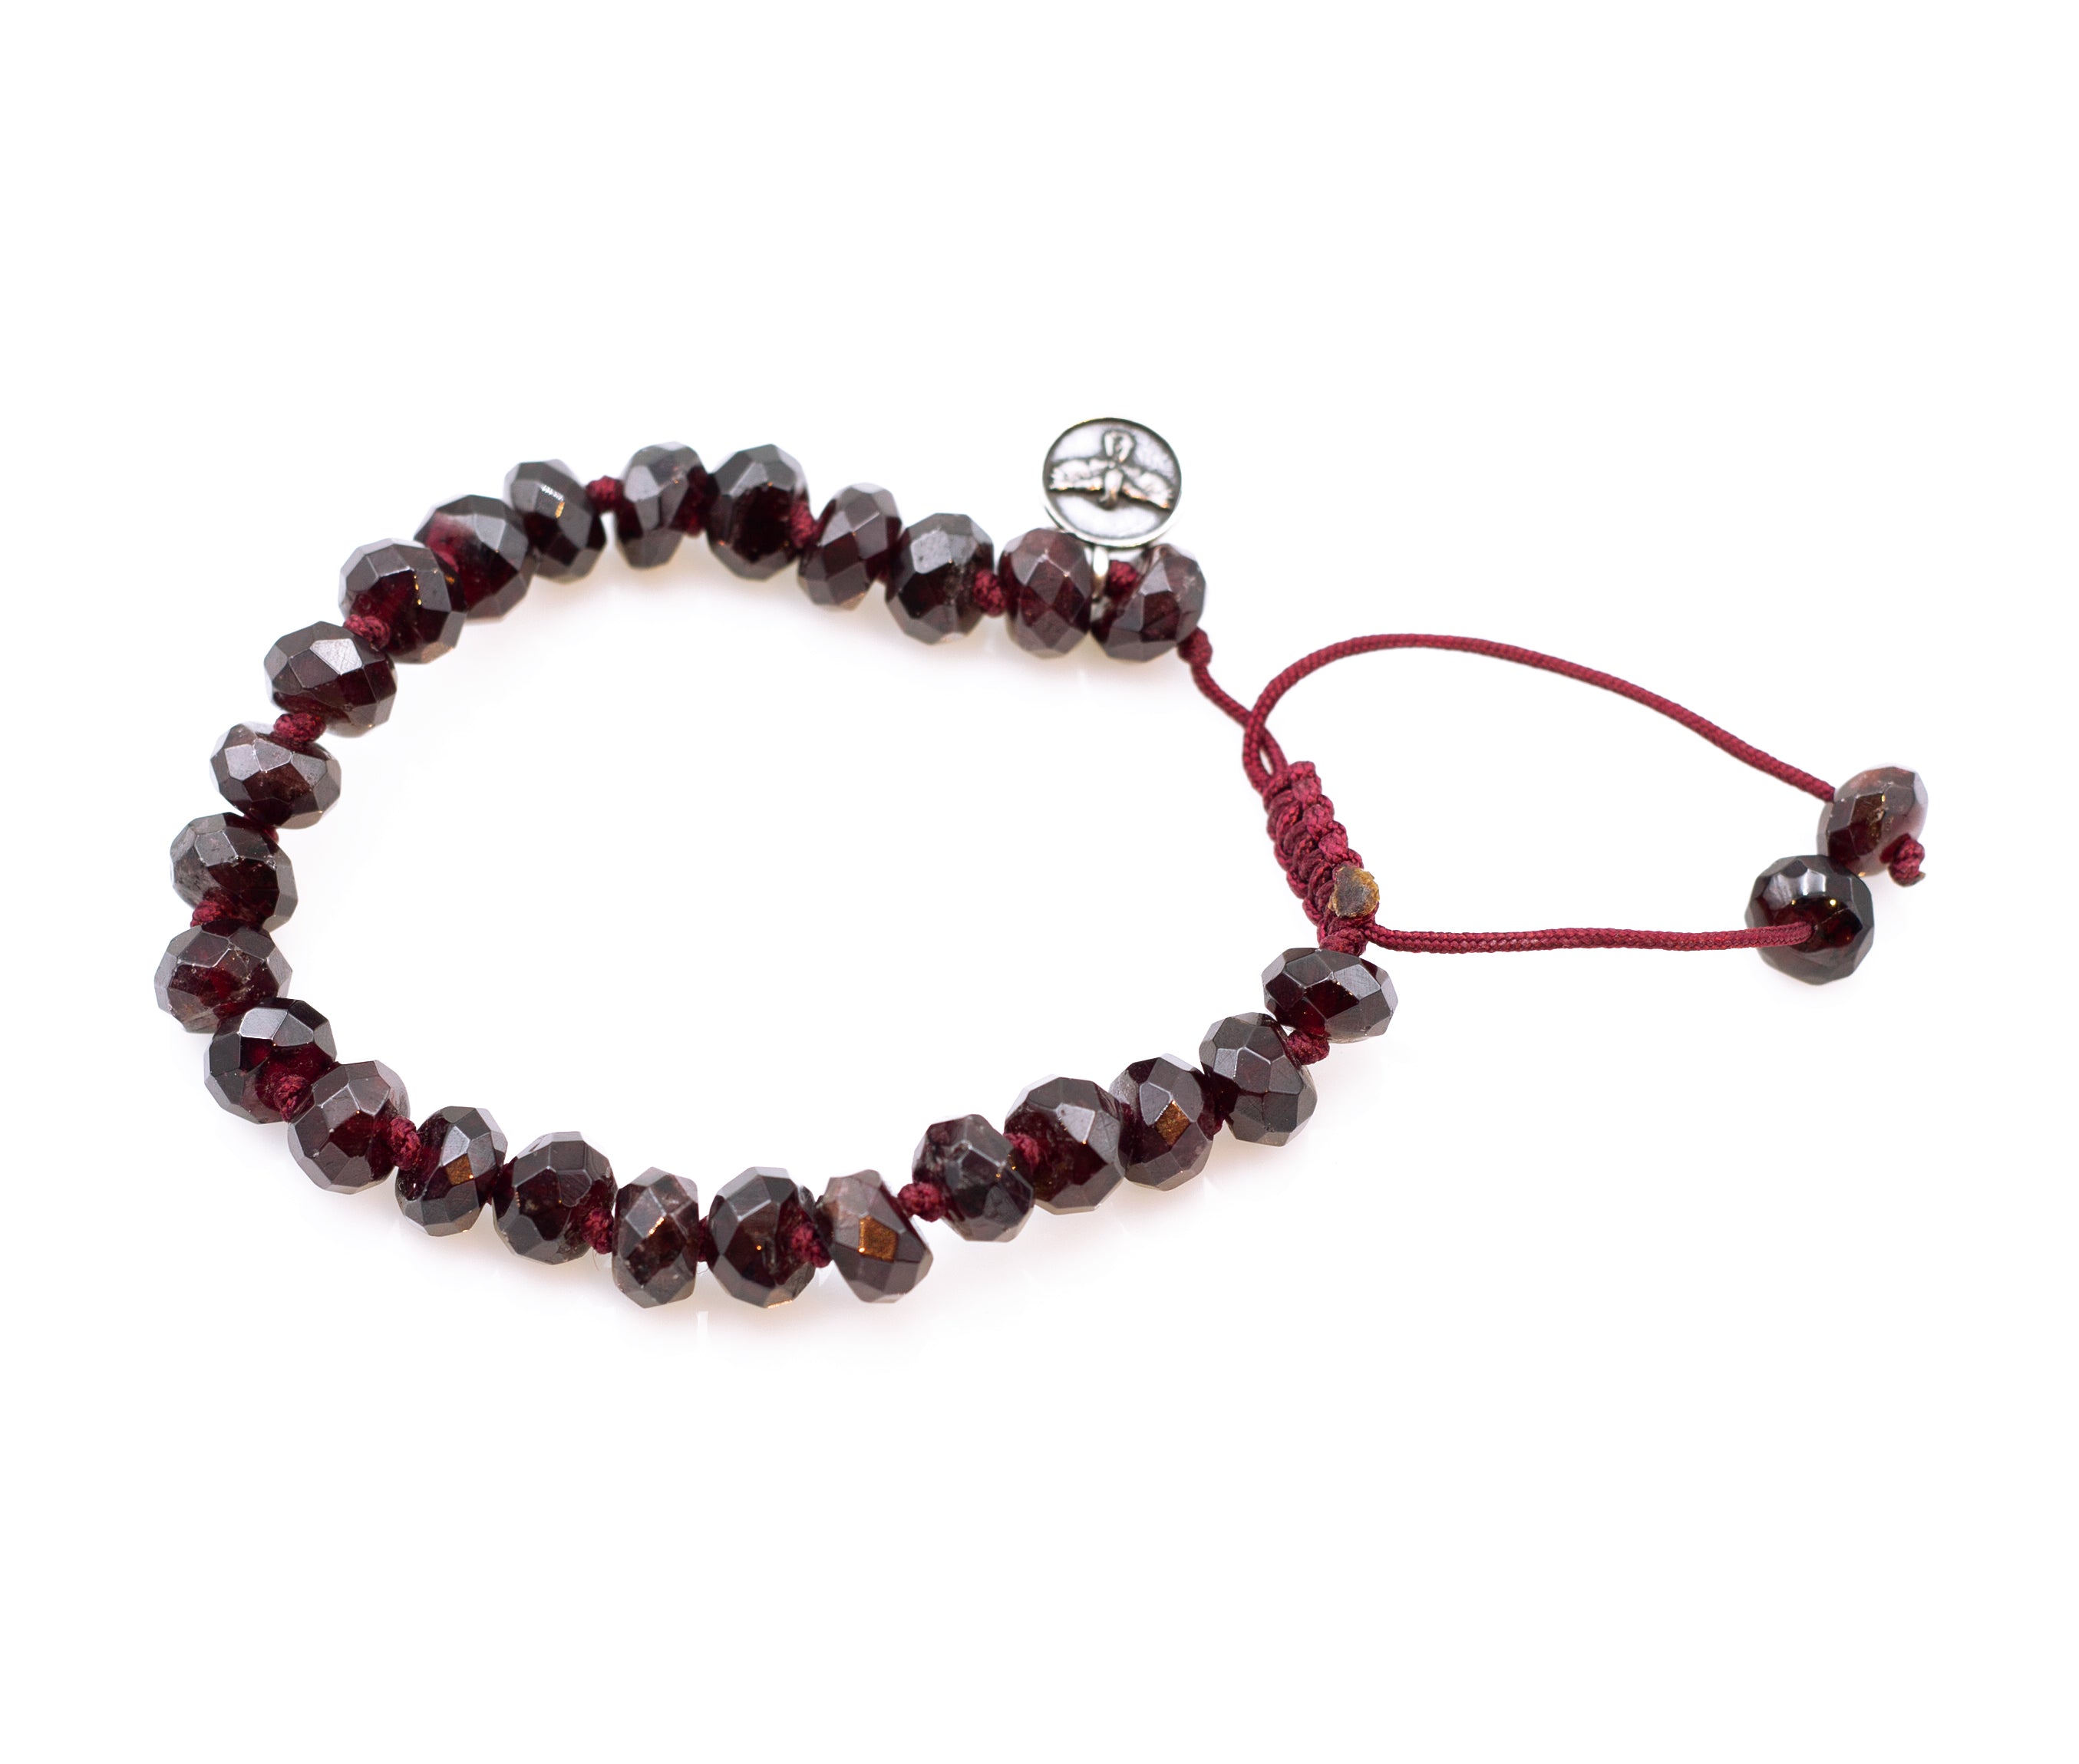 4mm Beaded Bracelet with a Row of Garnet Gemstones - Kelly and Rose Boutique